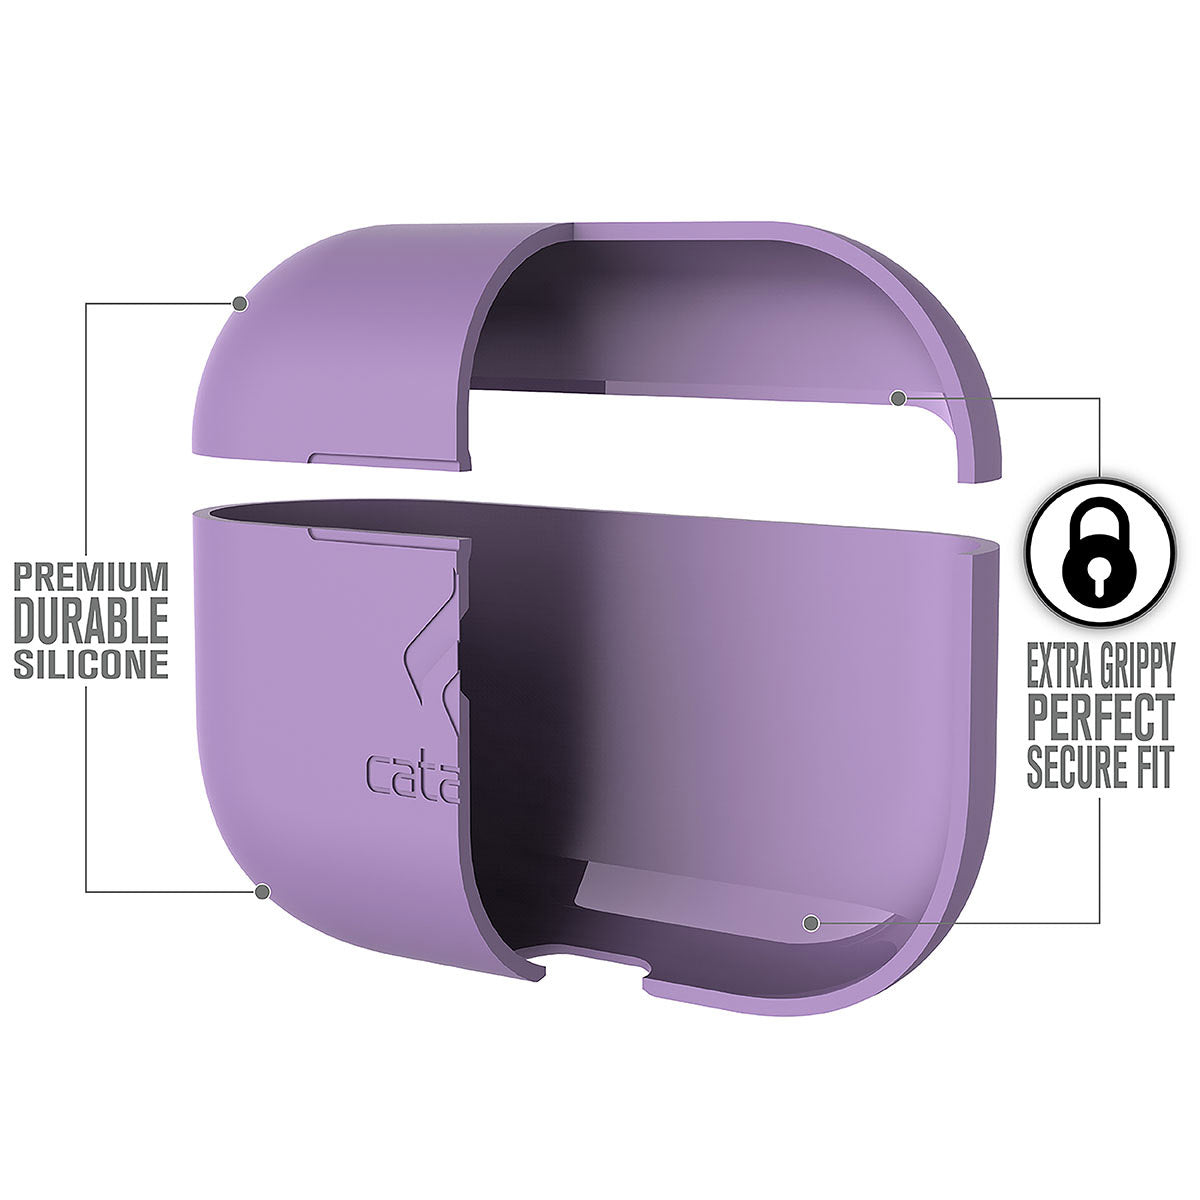 Catalyst airpods pro gen 2/1 slim case showing the case features in a lilac colorway text reads premium durable silicone extra grippy perfect secure fit